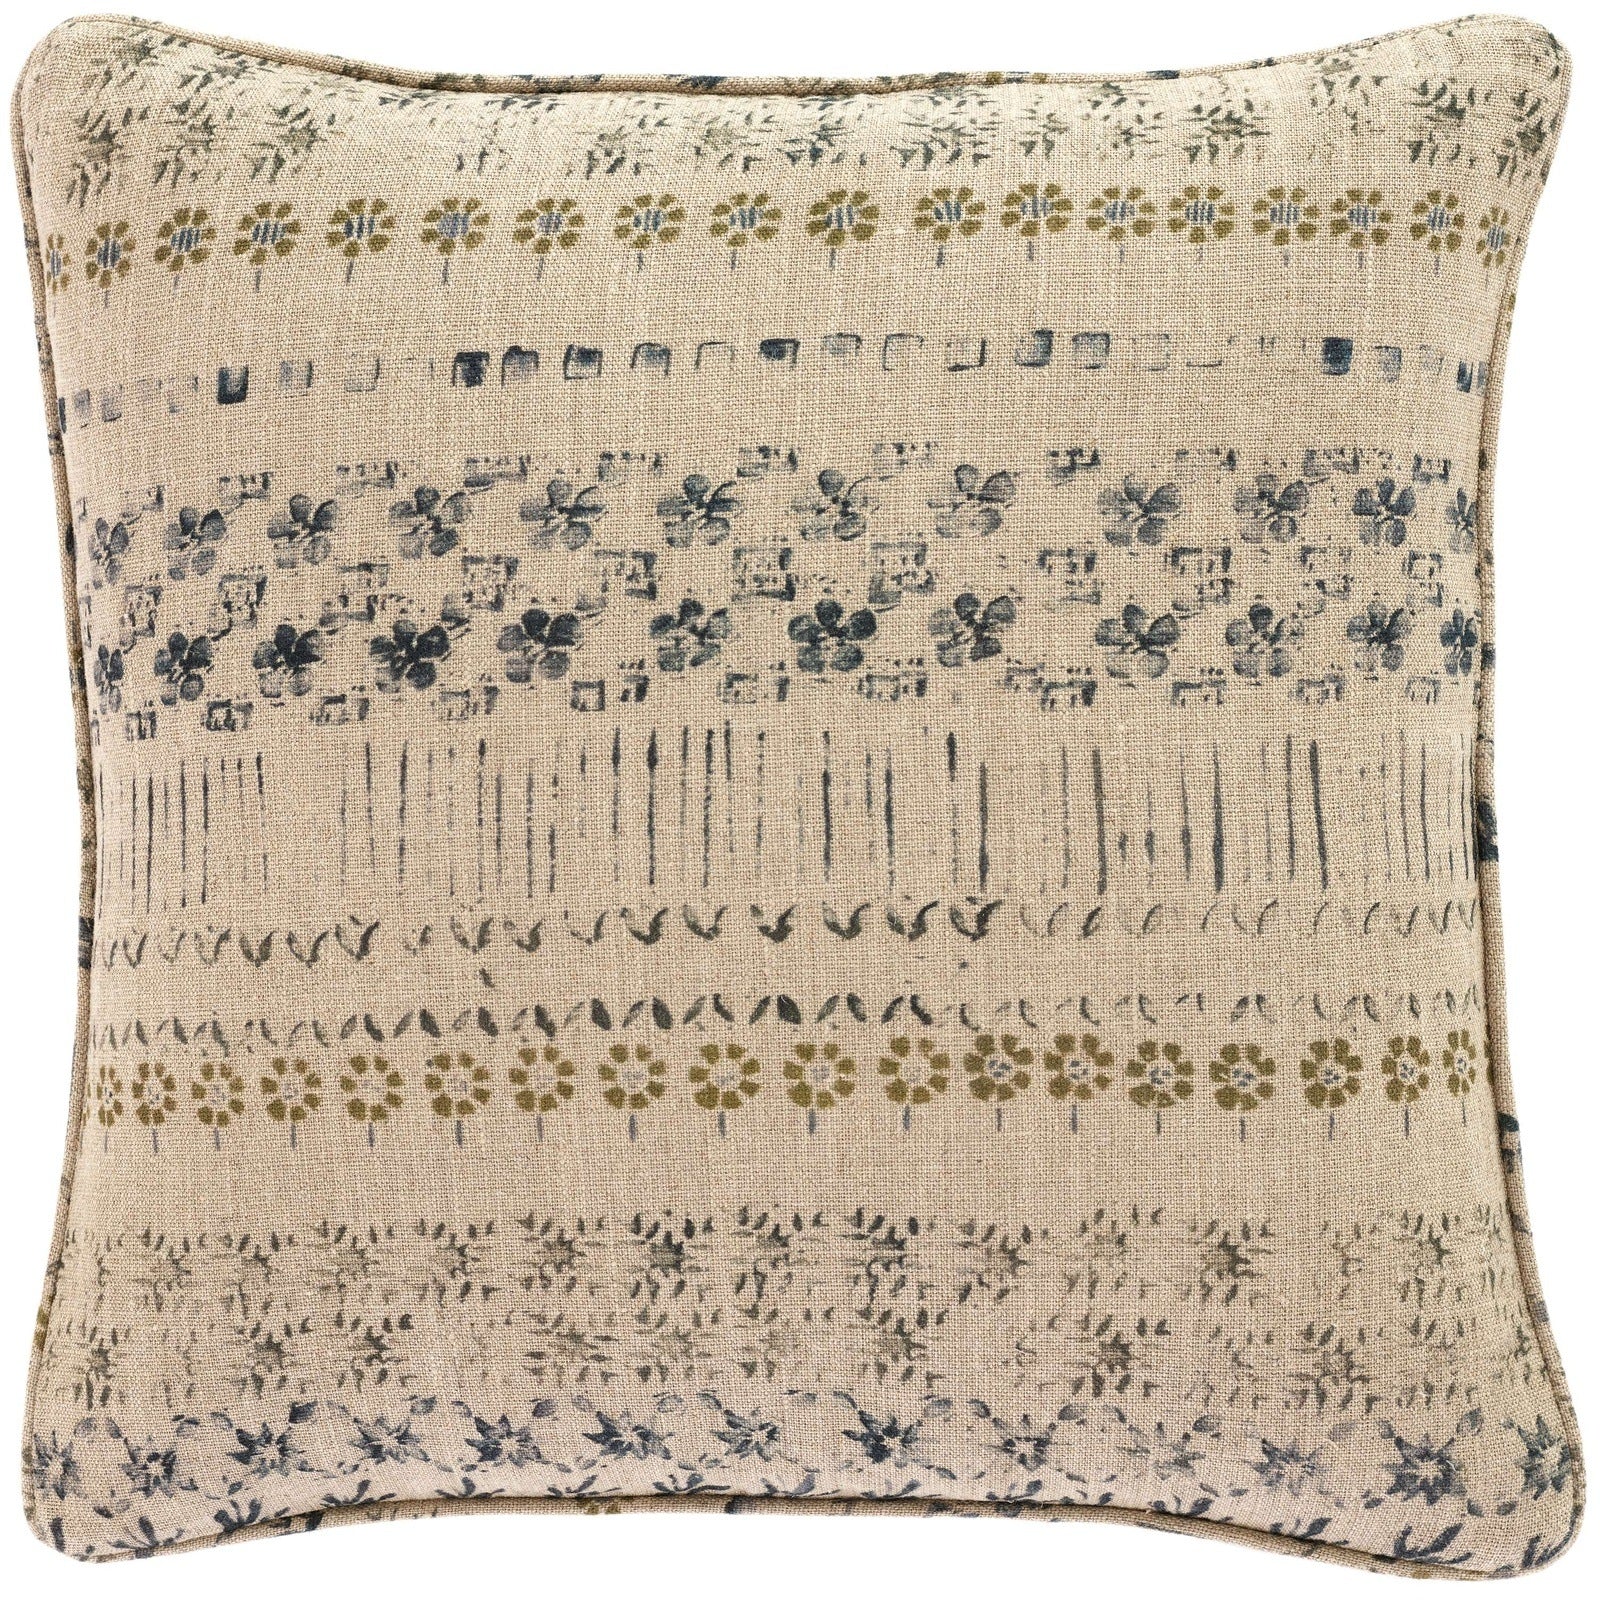 https://cdn.shopify.com/s/files/1/0091/7294/2912/products/Pine_Cone_Hill_Spruce_Linen_Blue_Decorative_Pillow_7_1600x.jpg?v=1668308762